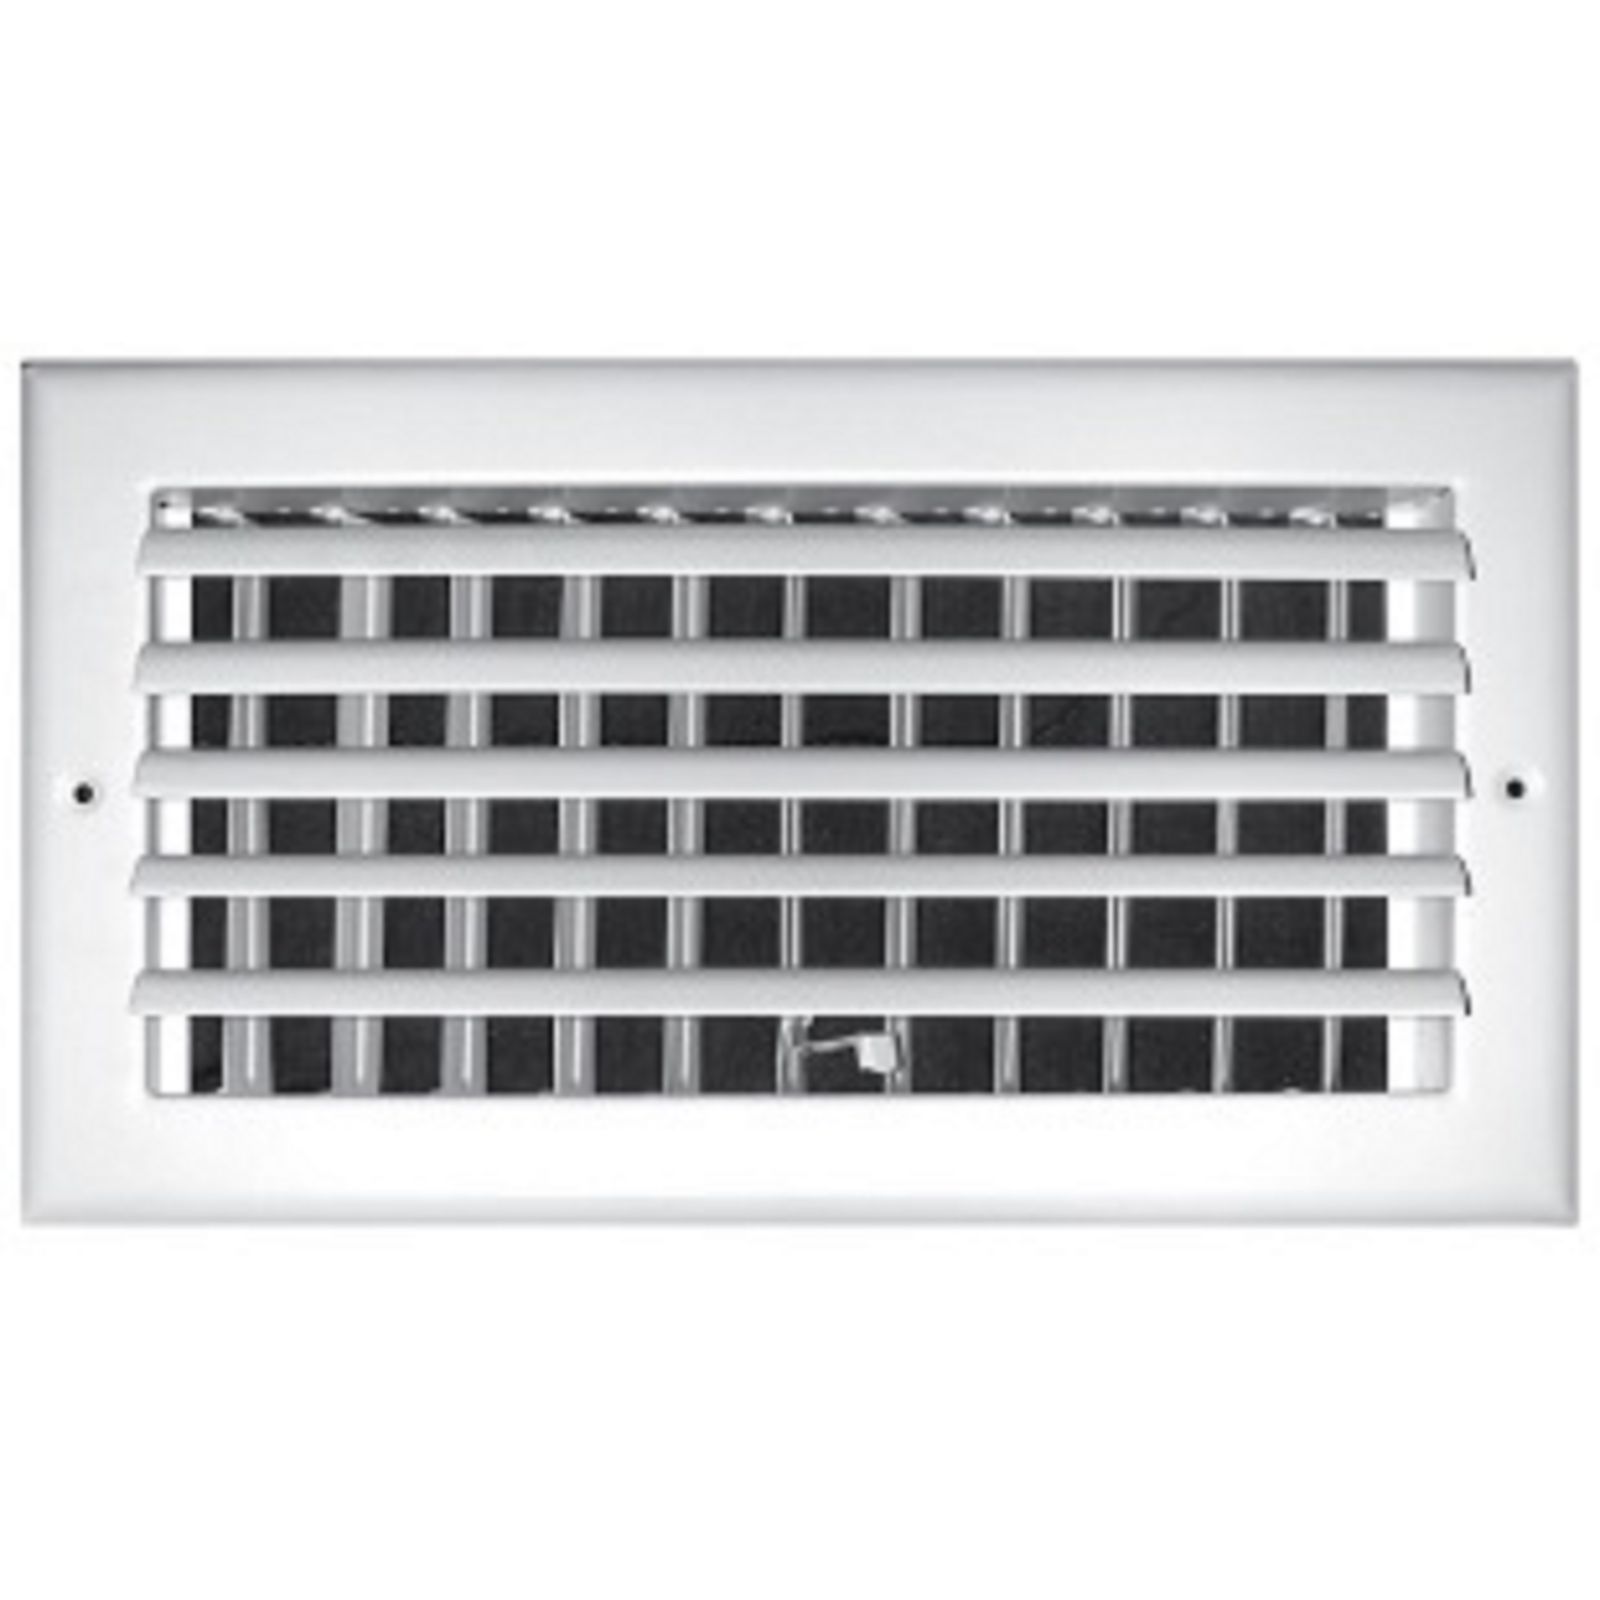 TRUaire 301M 10X10 - Steel Adjustable Curved Blade Wall/Ceiling Register With Multi Shutter Damper, 1-Way, White, 10" X 10"